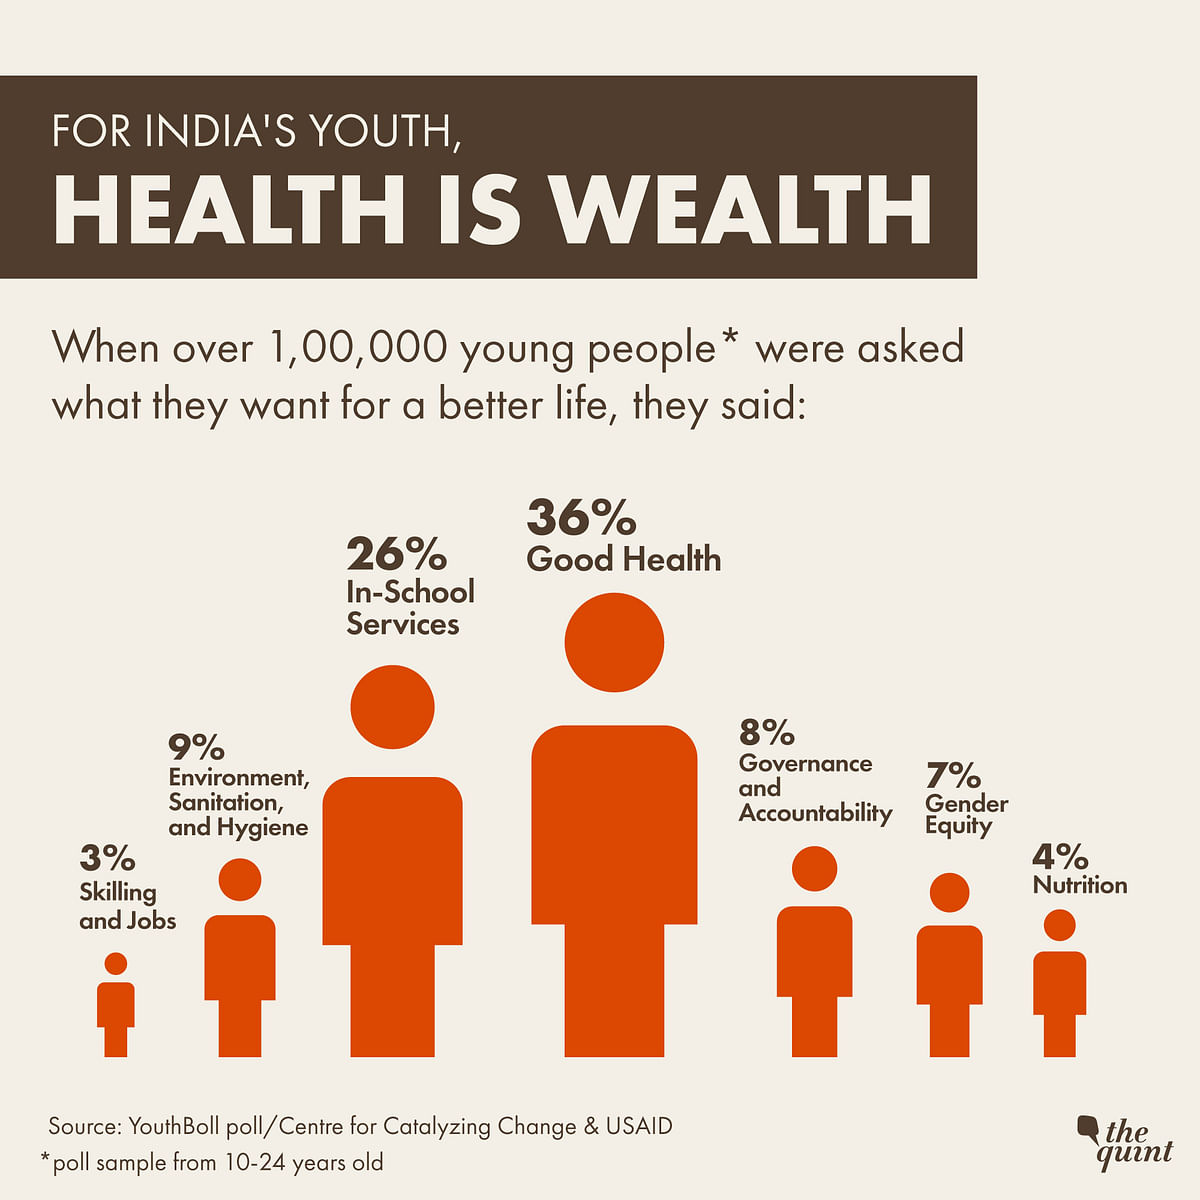 Over 1,00,000 young Indians were asked “For physical and mental health, I want...”. Here’s what they said.